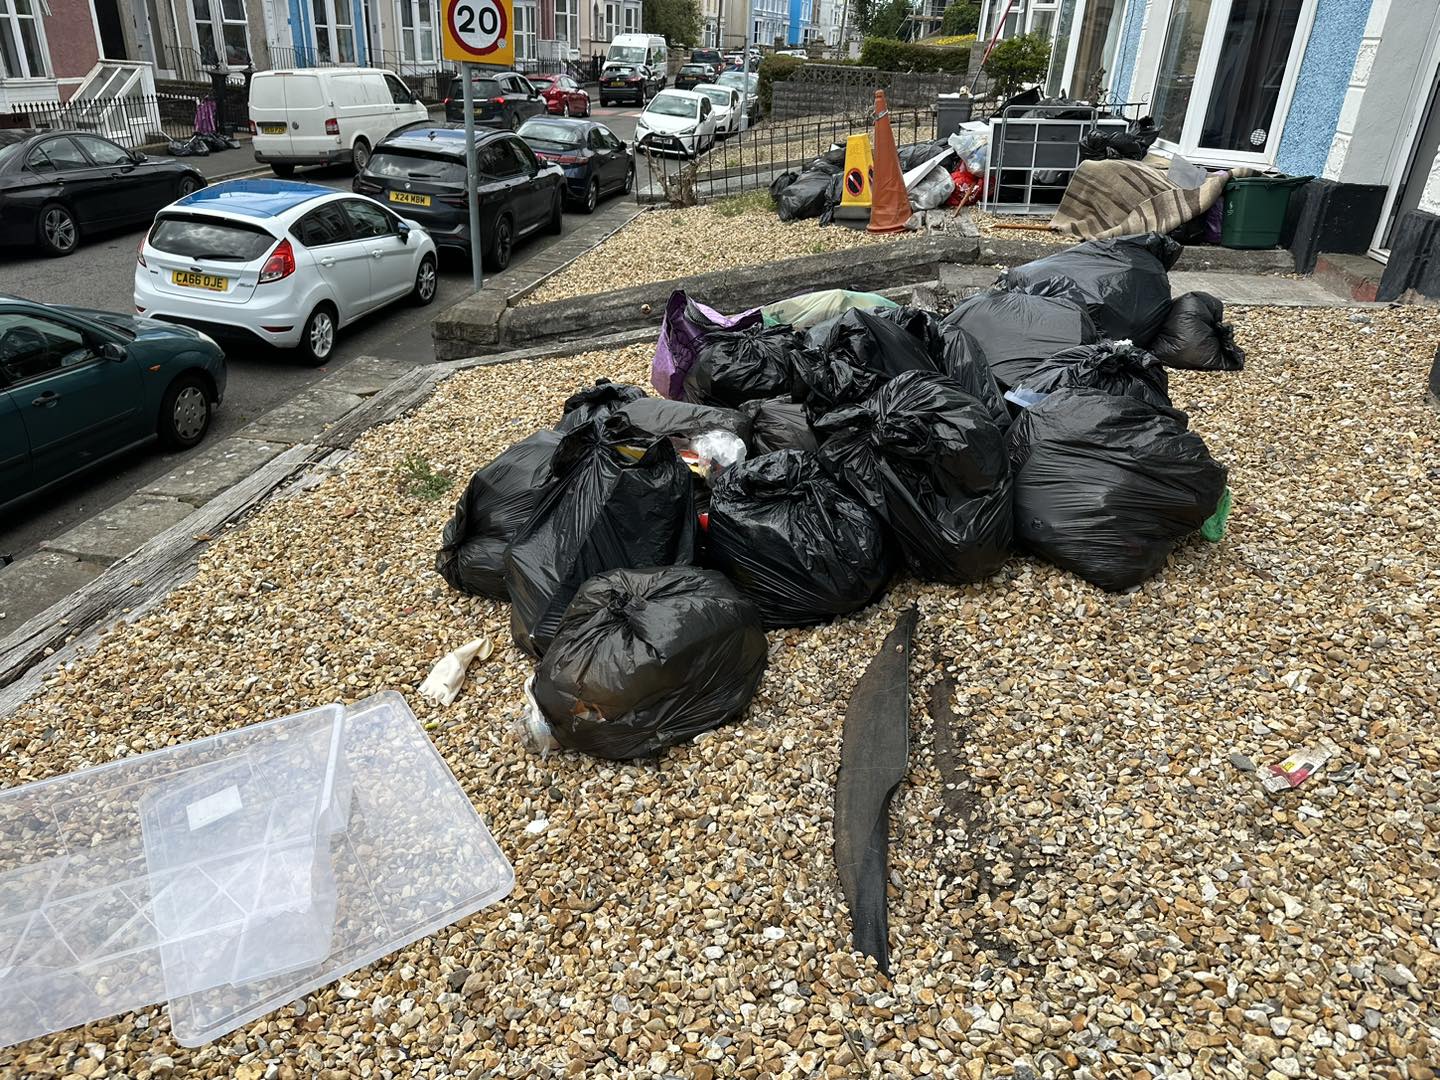 a photo of black bags on gravel garden next to parked cars in Neath, Port Talbot, And Swansea